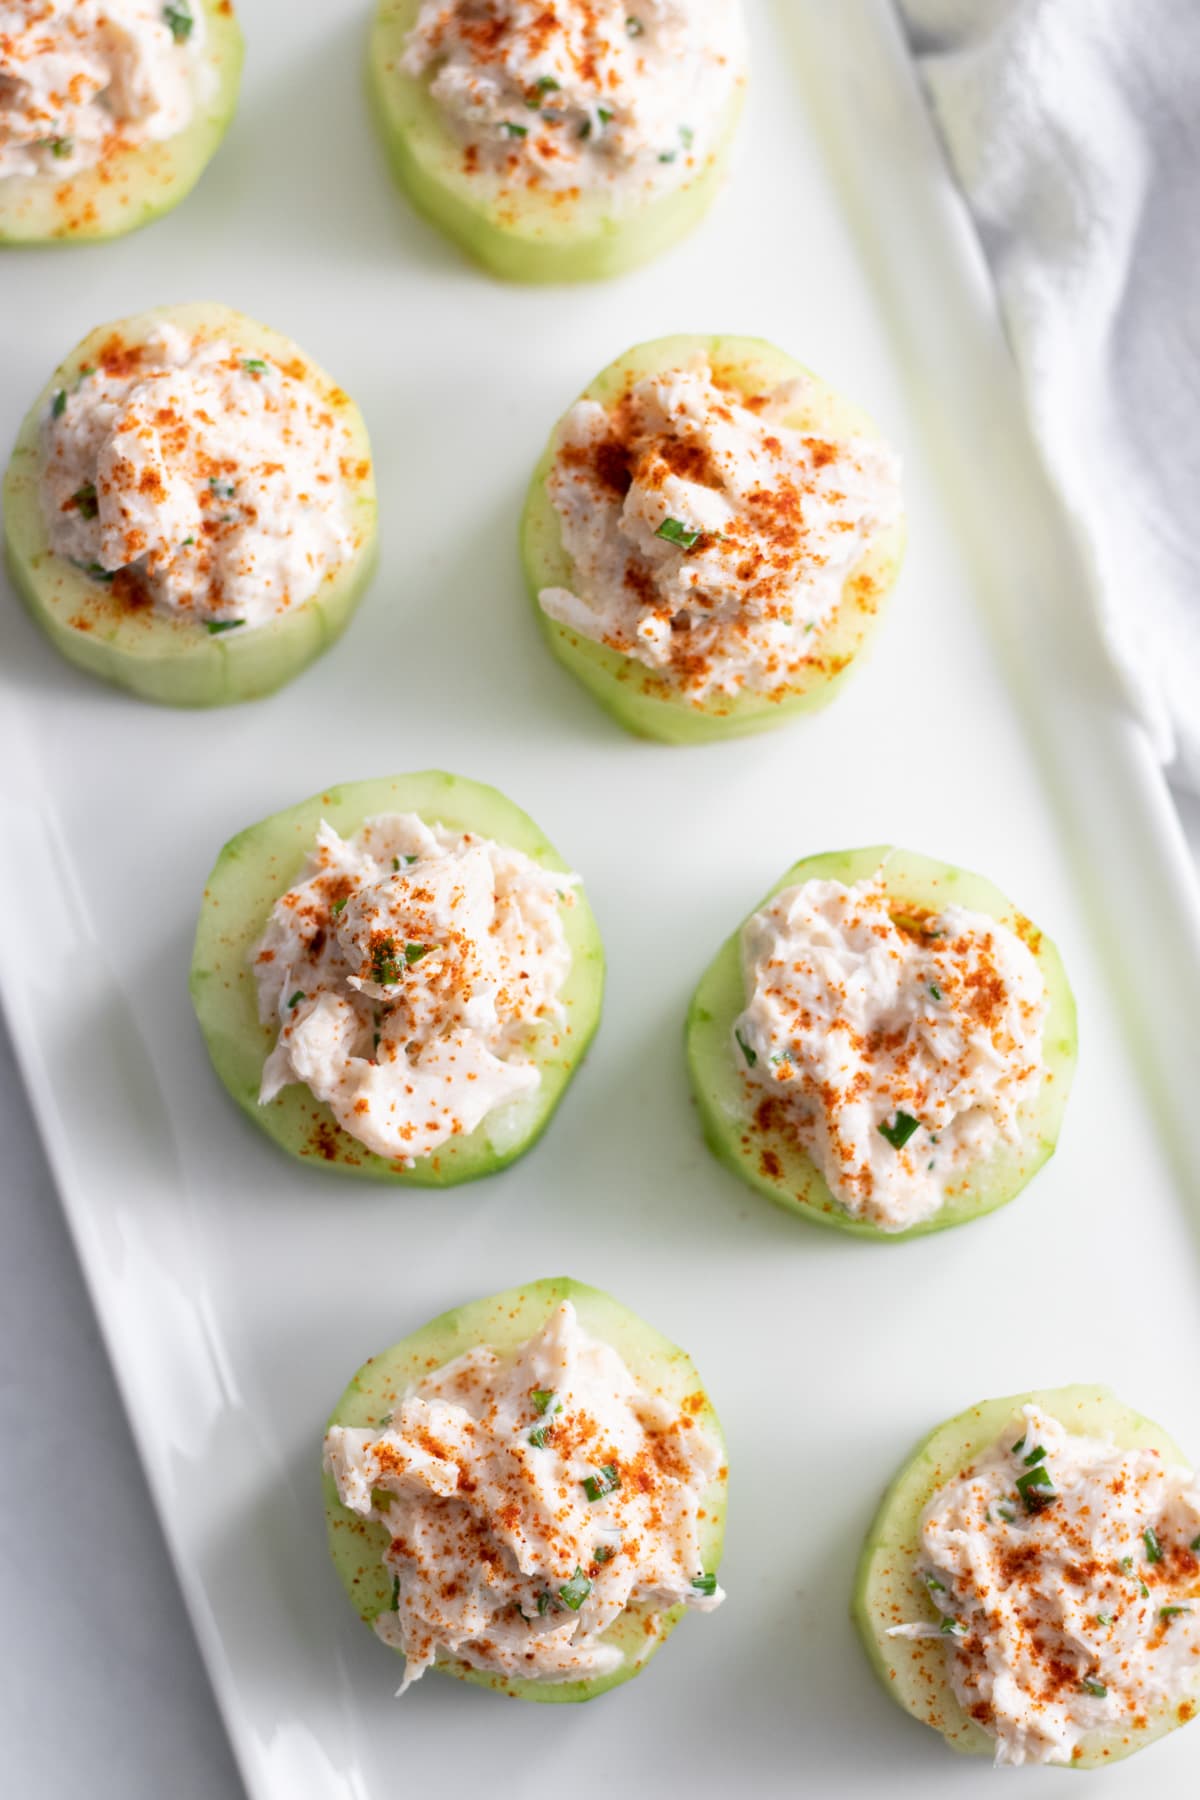 Cucumber cups filled with a creamy crabmeat mixture and dusted with paprika.